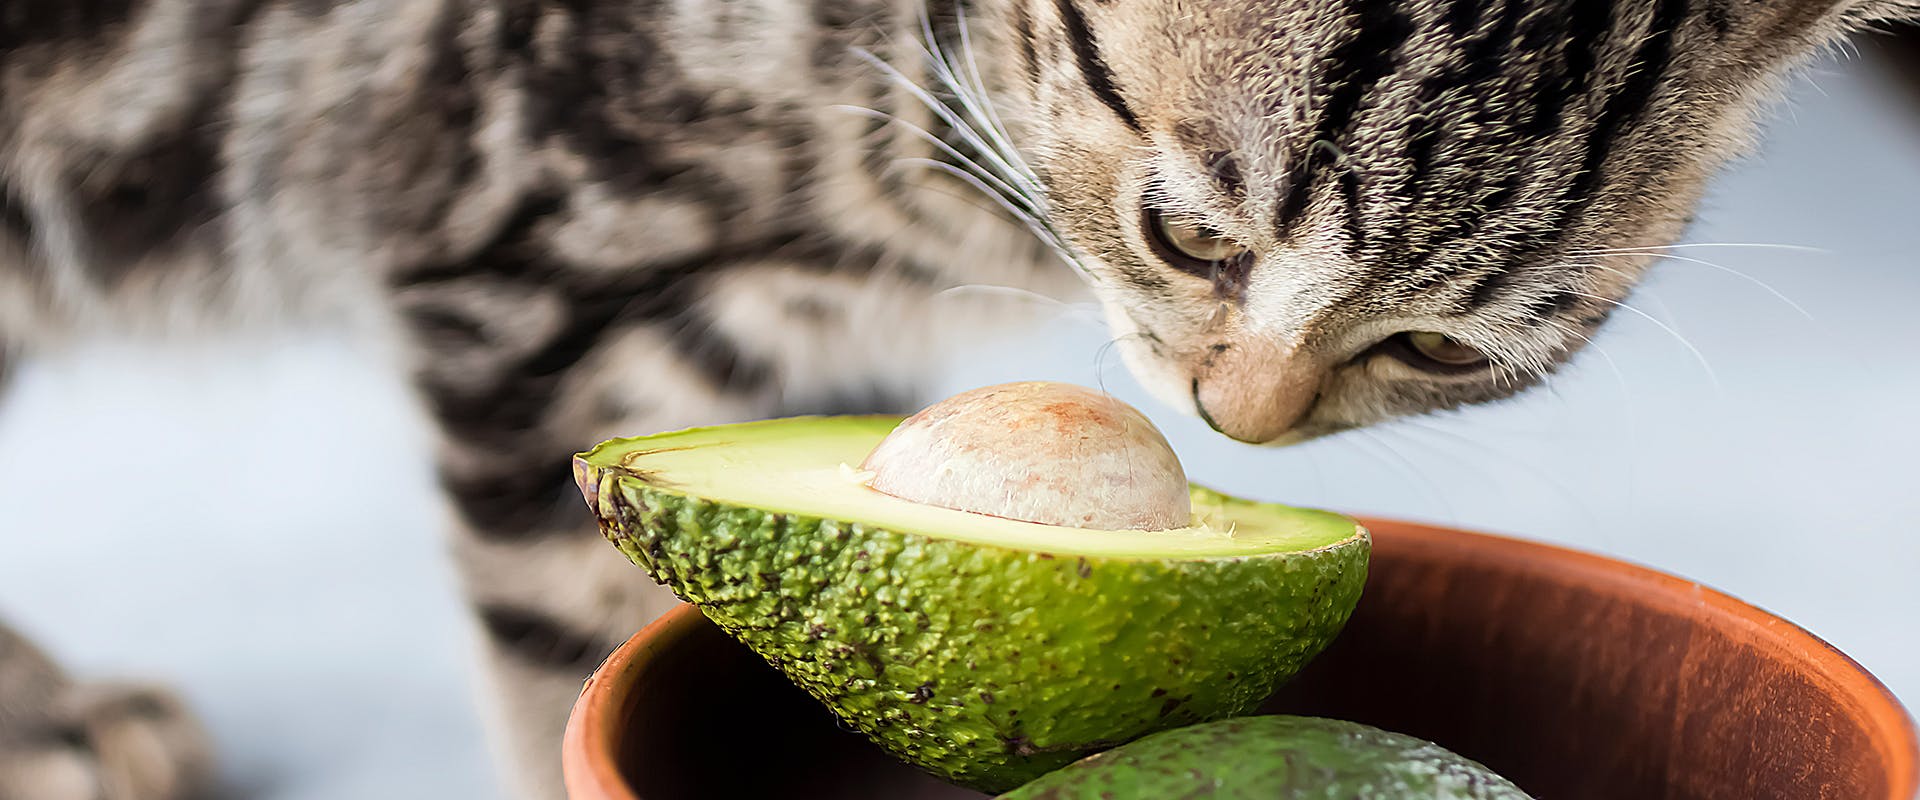 A small fluffy kitten sniffing at an avocado